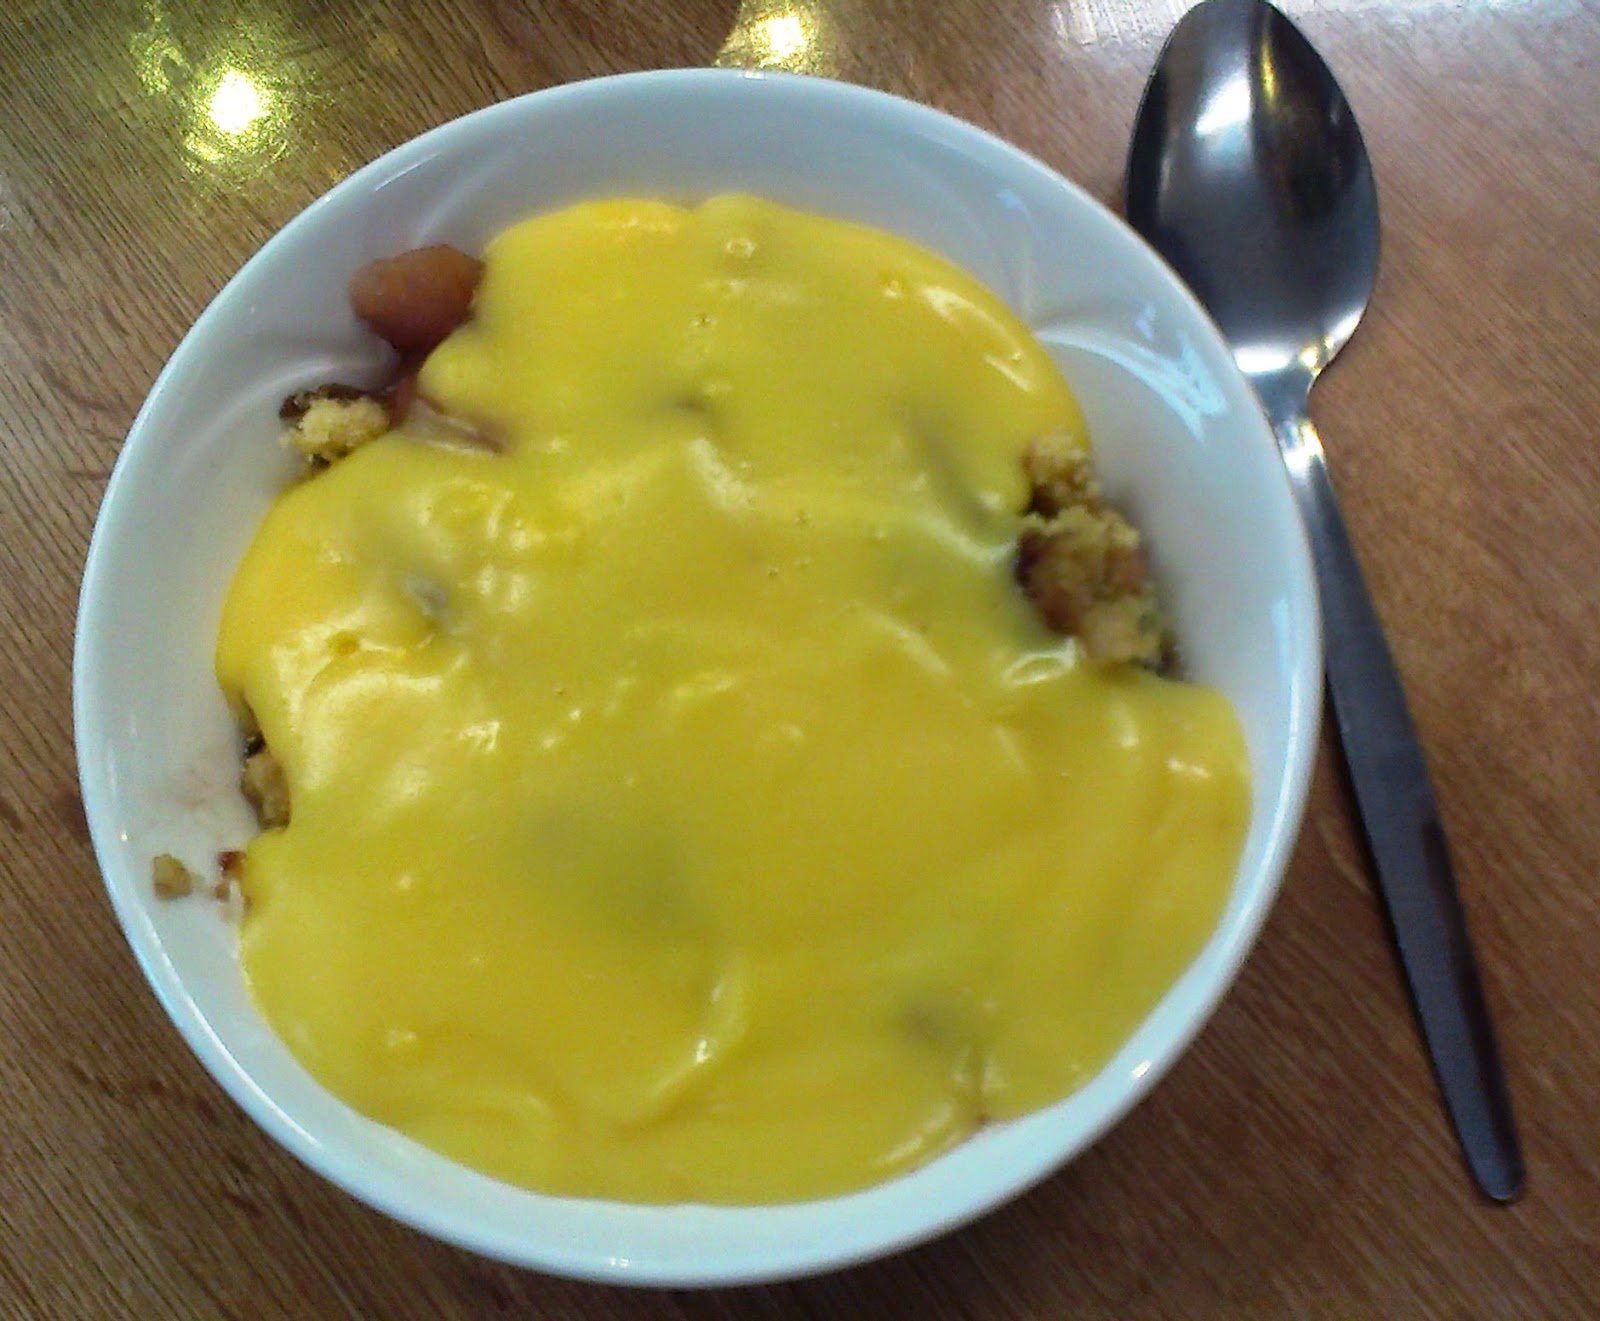 Blackberry and Apple Crumble with Custard